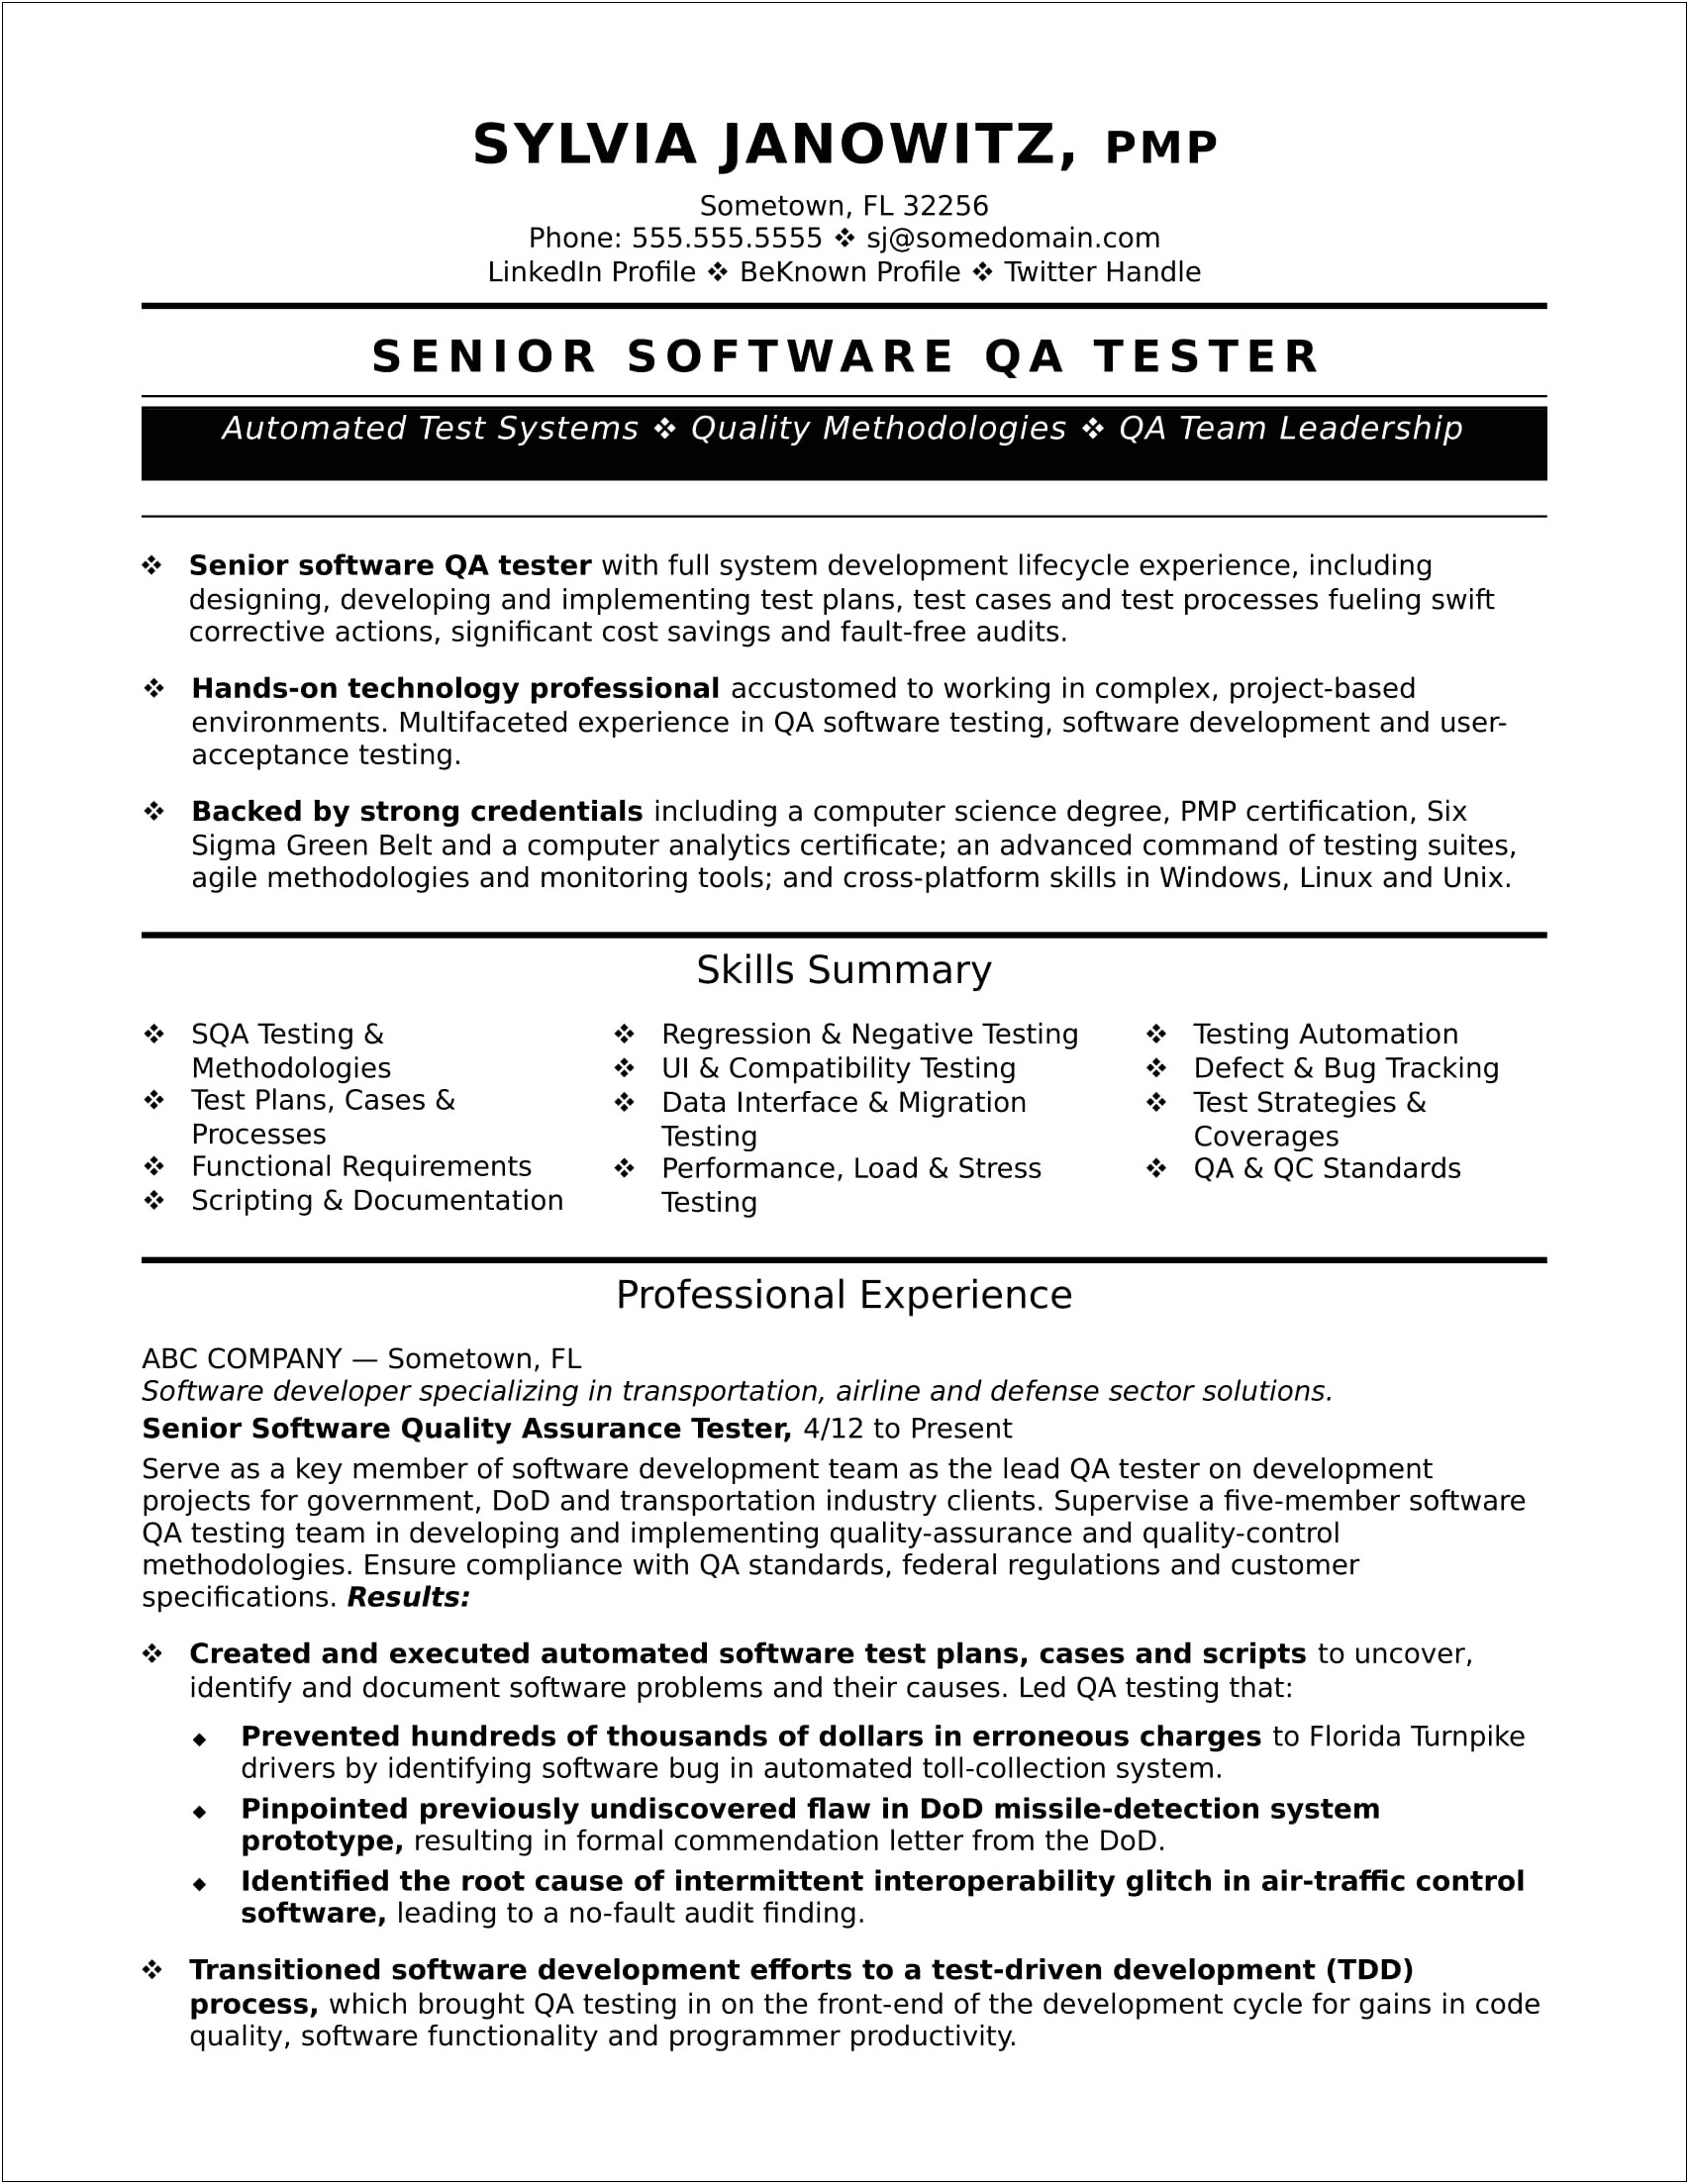 Manual Tester Resume 2 Years Experience